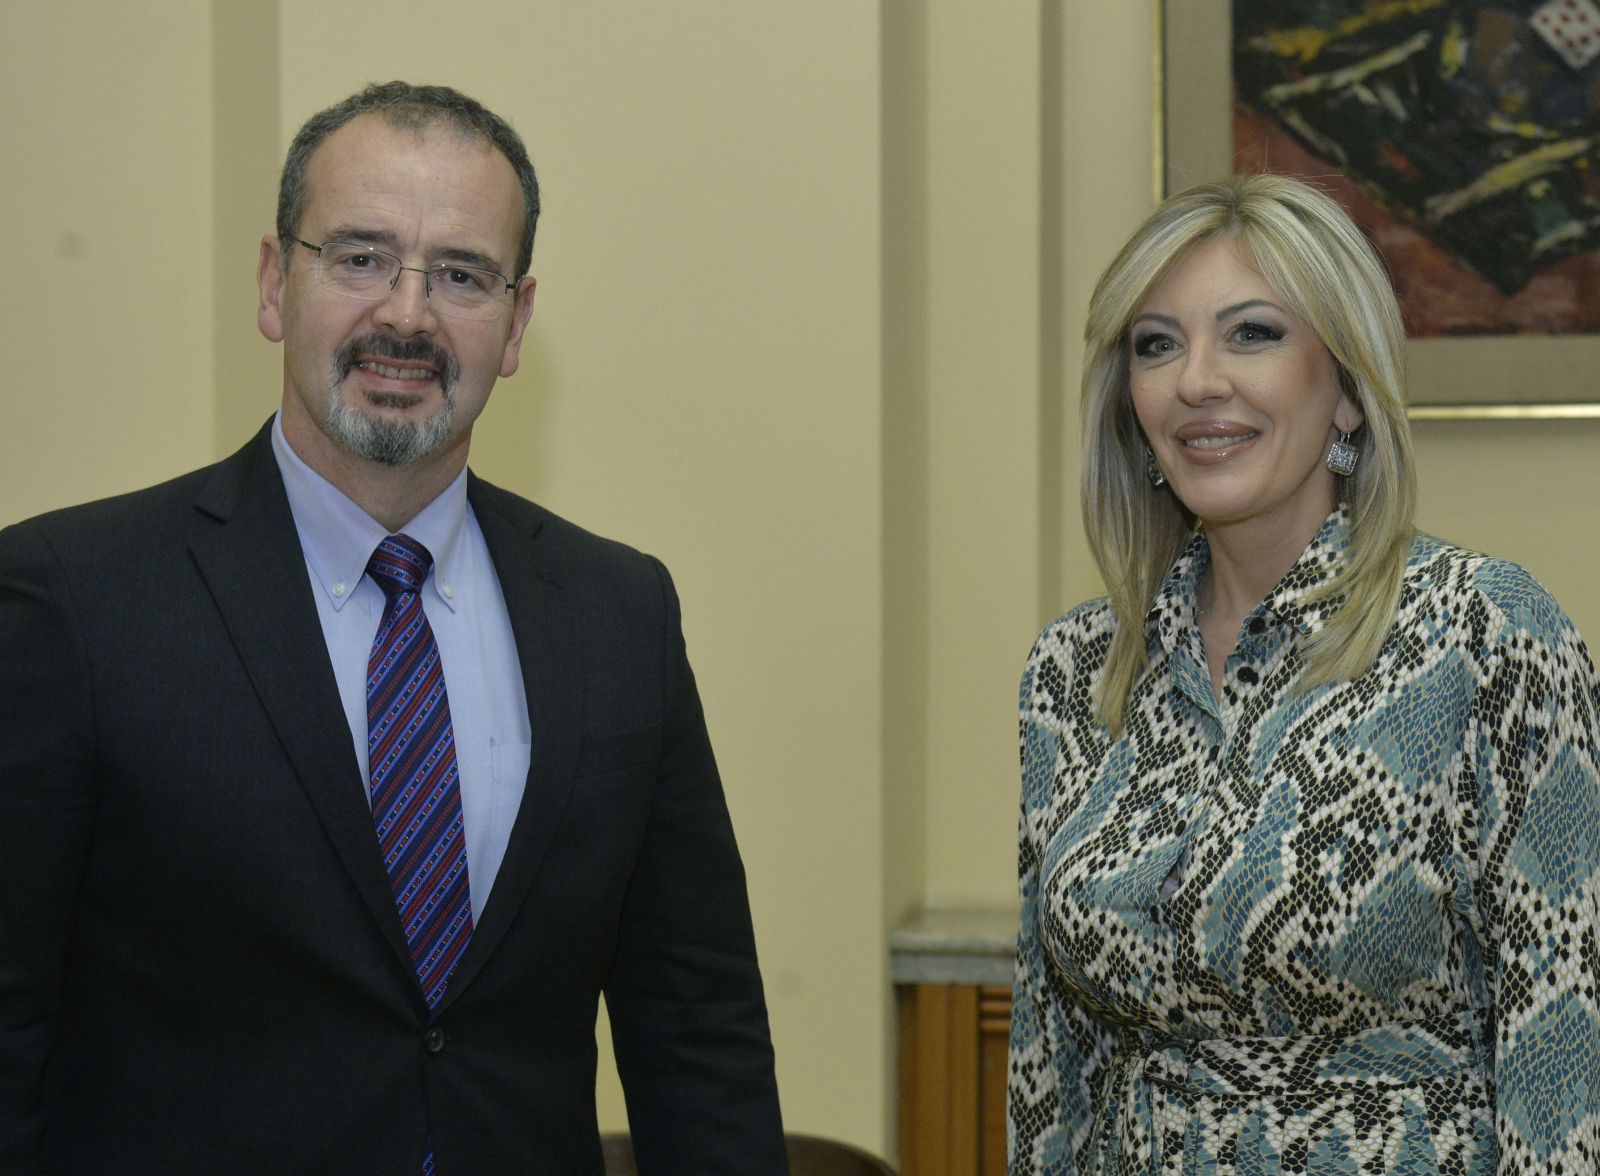  J. Joksimović and Godfrey: The US strongly supports Serbia's reforms and European path